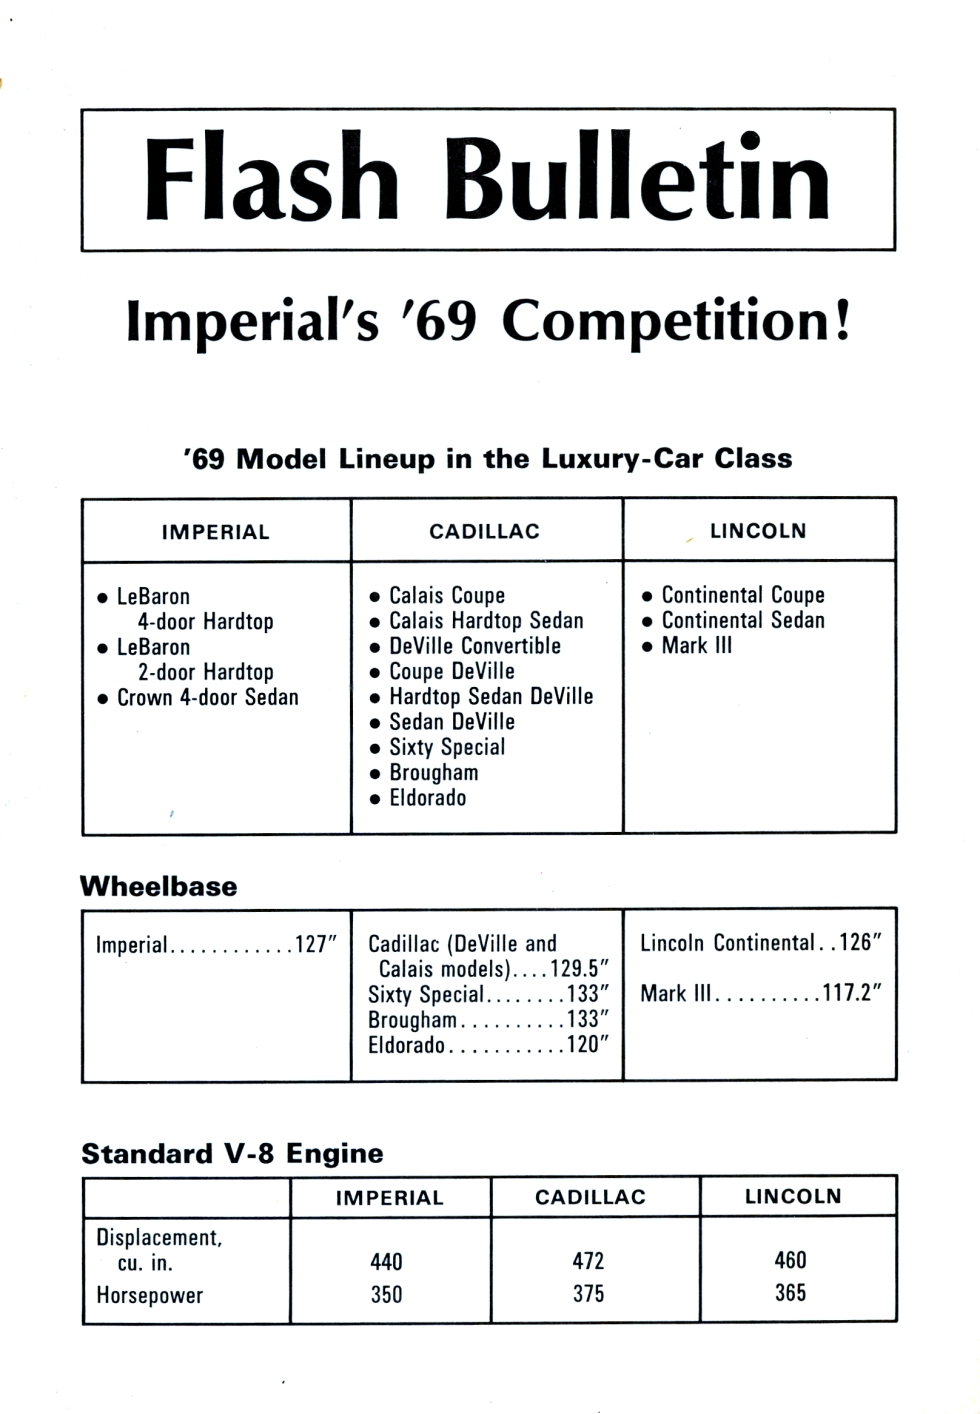 1969-Imperials Competition-01